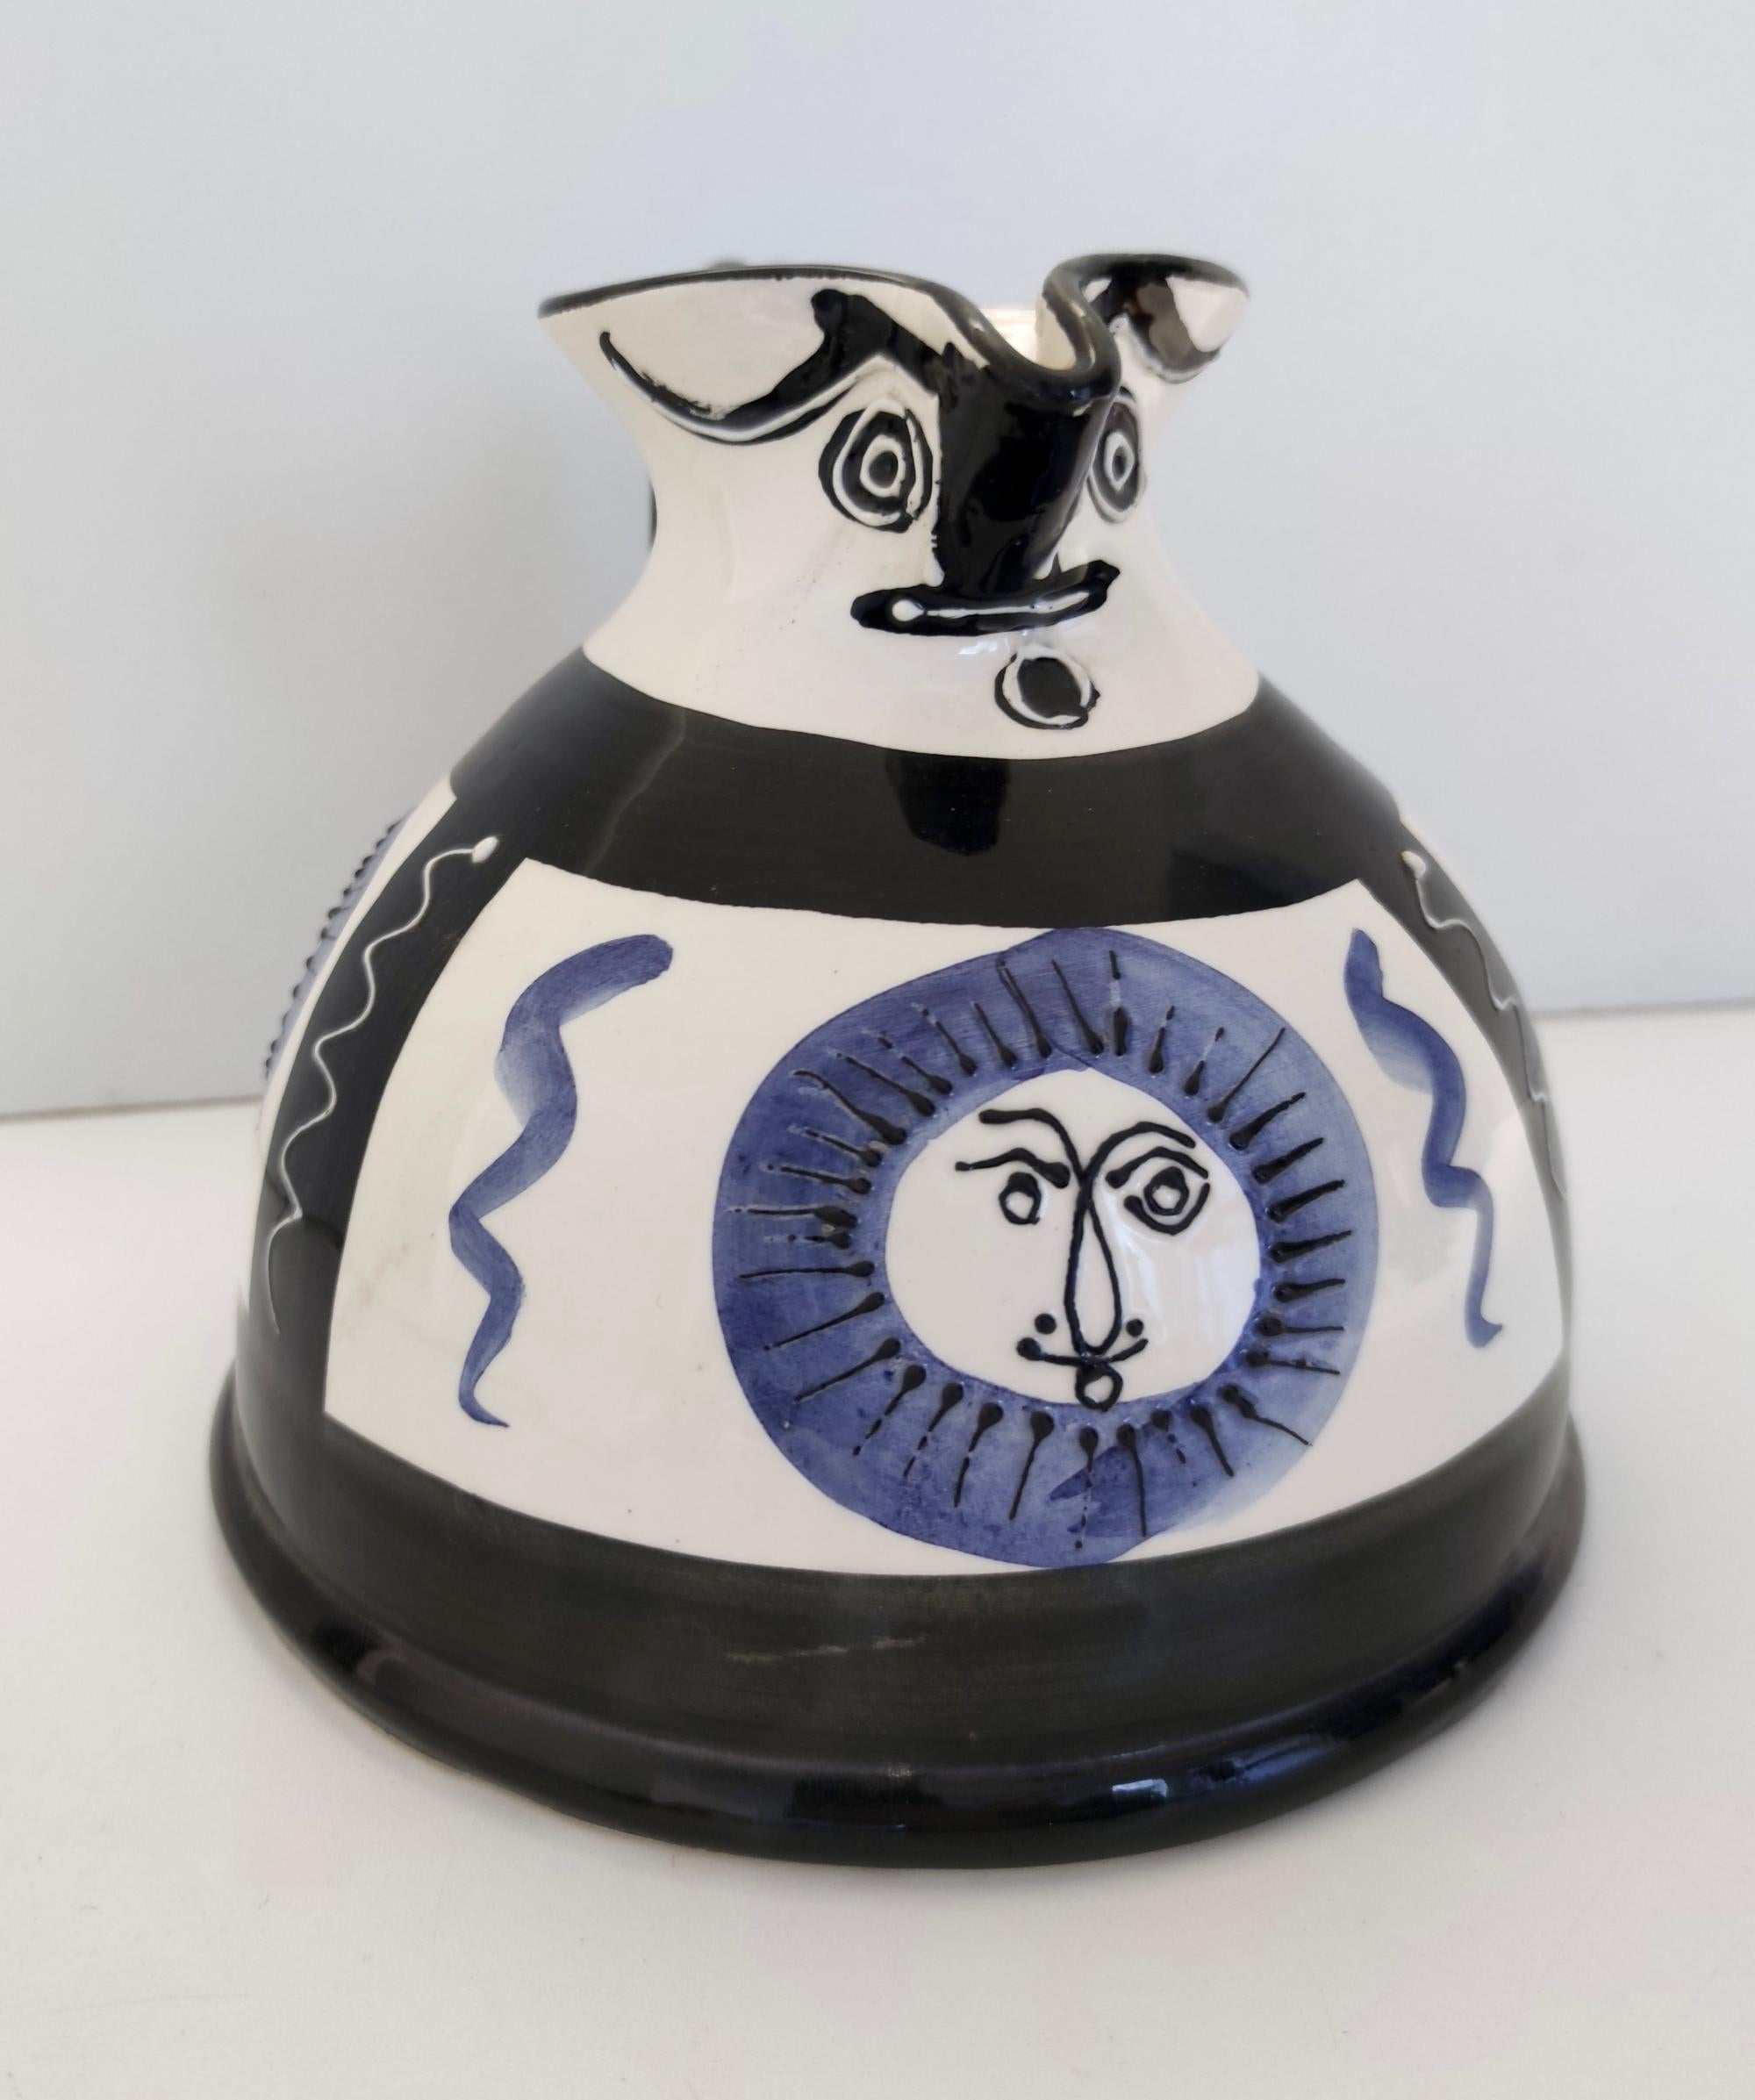 Made in France, 1960s - 1970s.
It is made in white hand-painted ceramic with blue and black motifs, that recalls Pablo Picasso's style.
It is a vintage item, therefore it might show slight traces of use, but it can be considered as in excellent